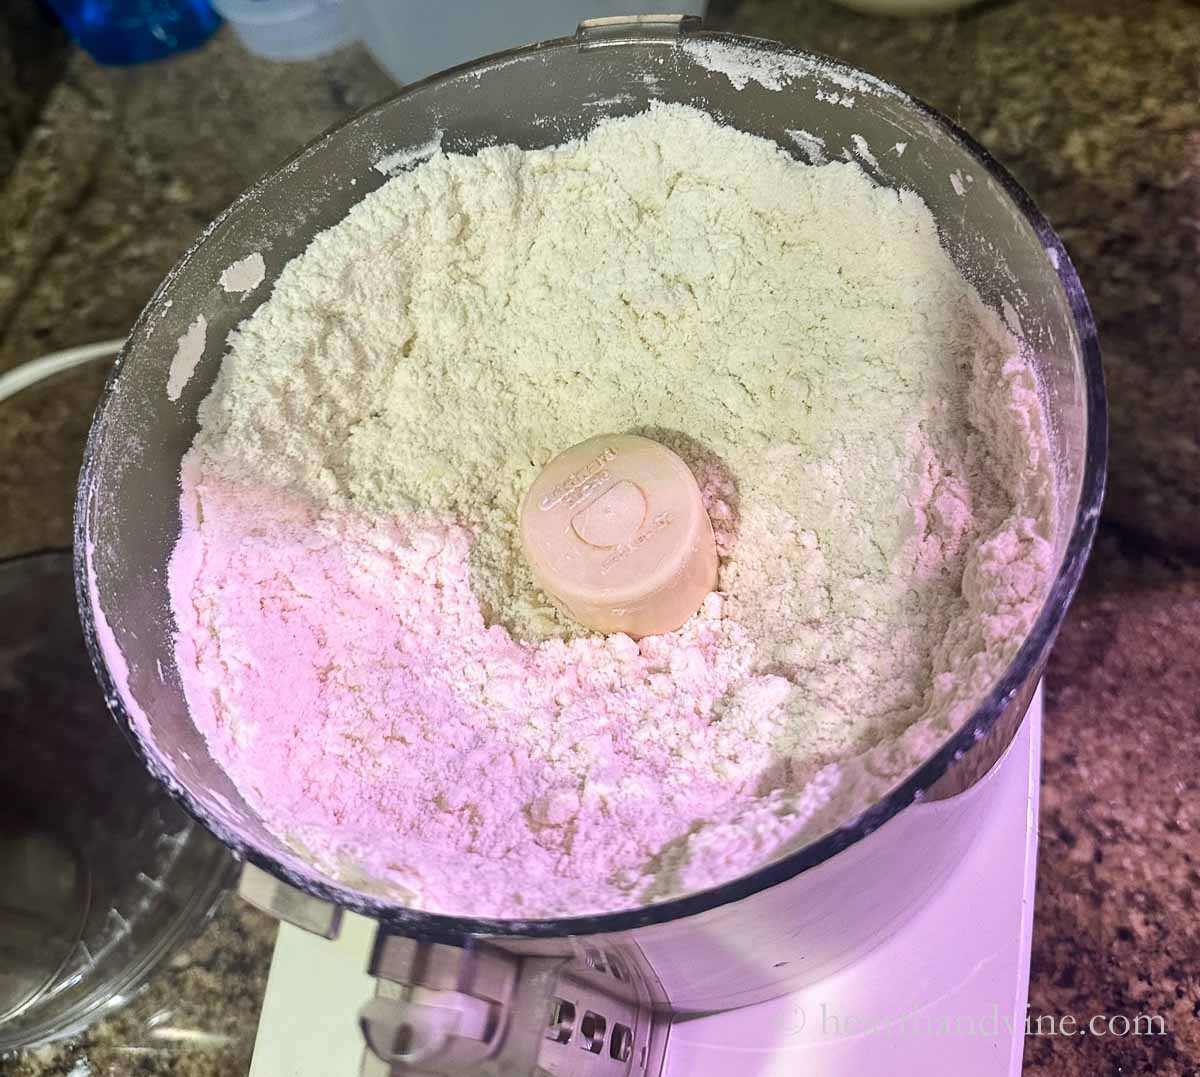 Flour mixture in a food processor with cold butter cubes mixed in.